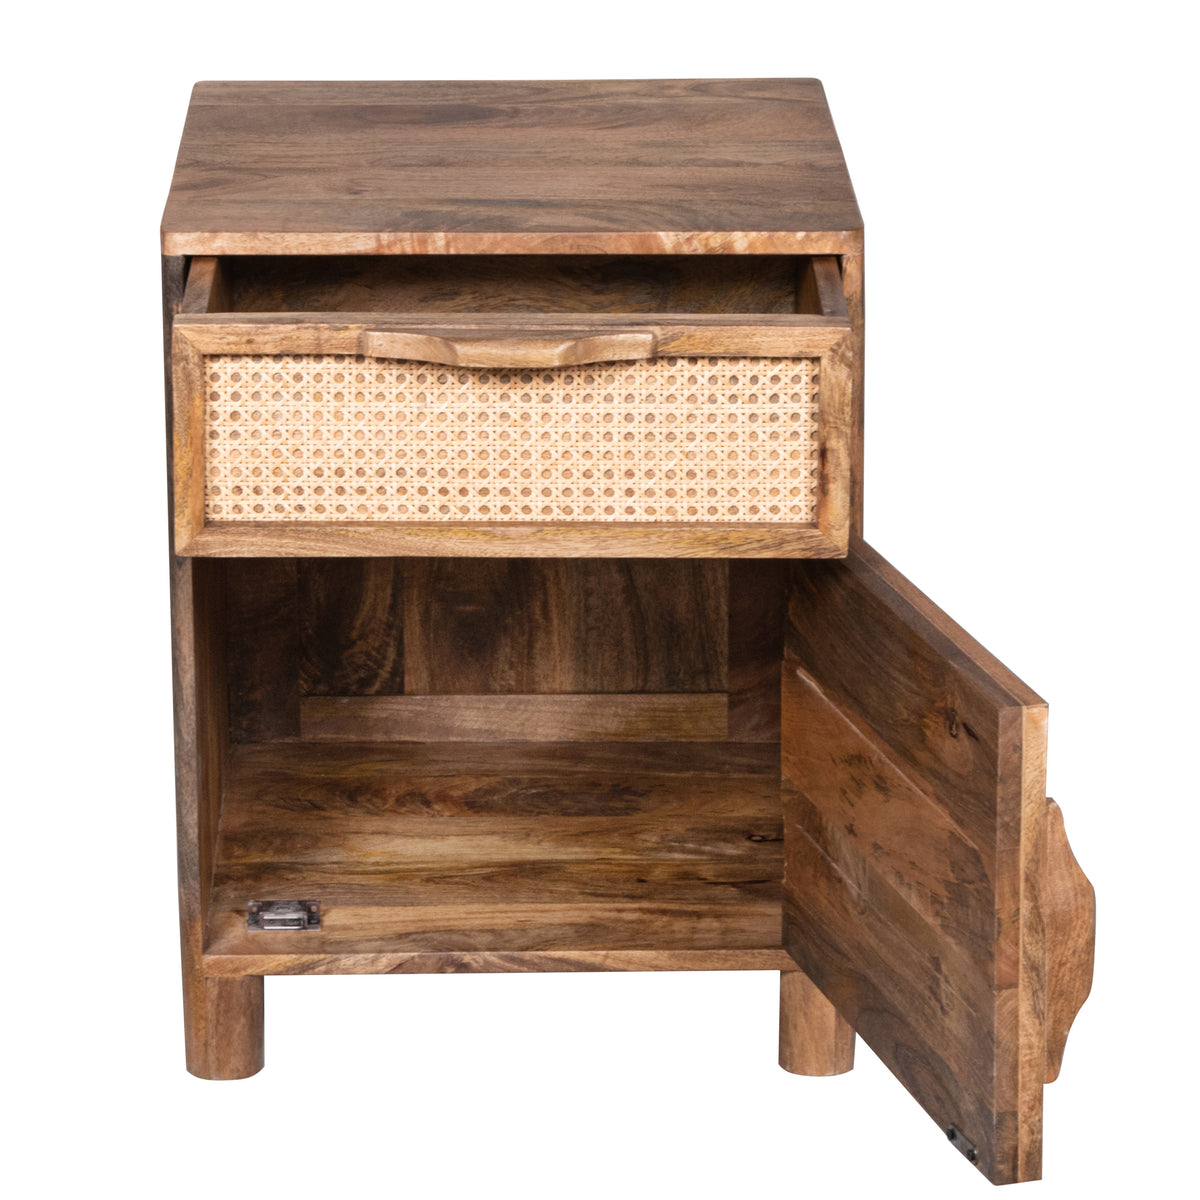 Mia 23 Inch Nightstand, Woven Rattan Cabinet Door and Drawer, Handcrafted Natural Brown Mango Wood - UPT-301715